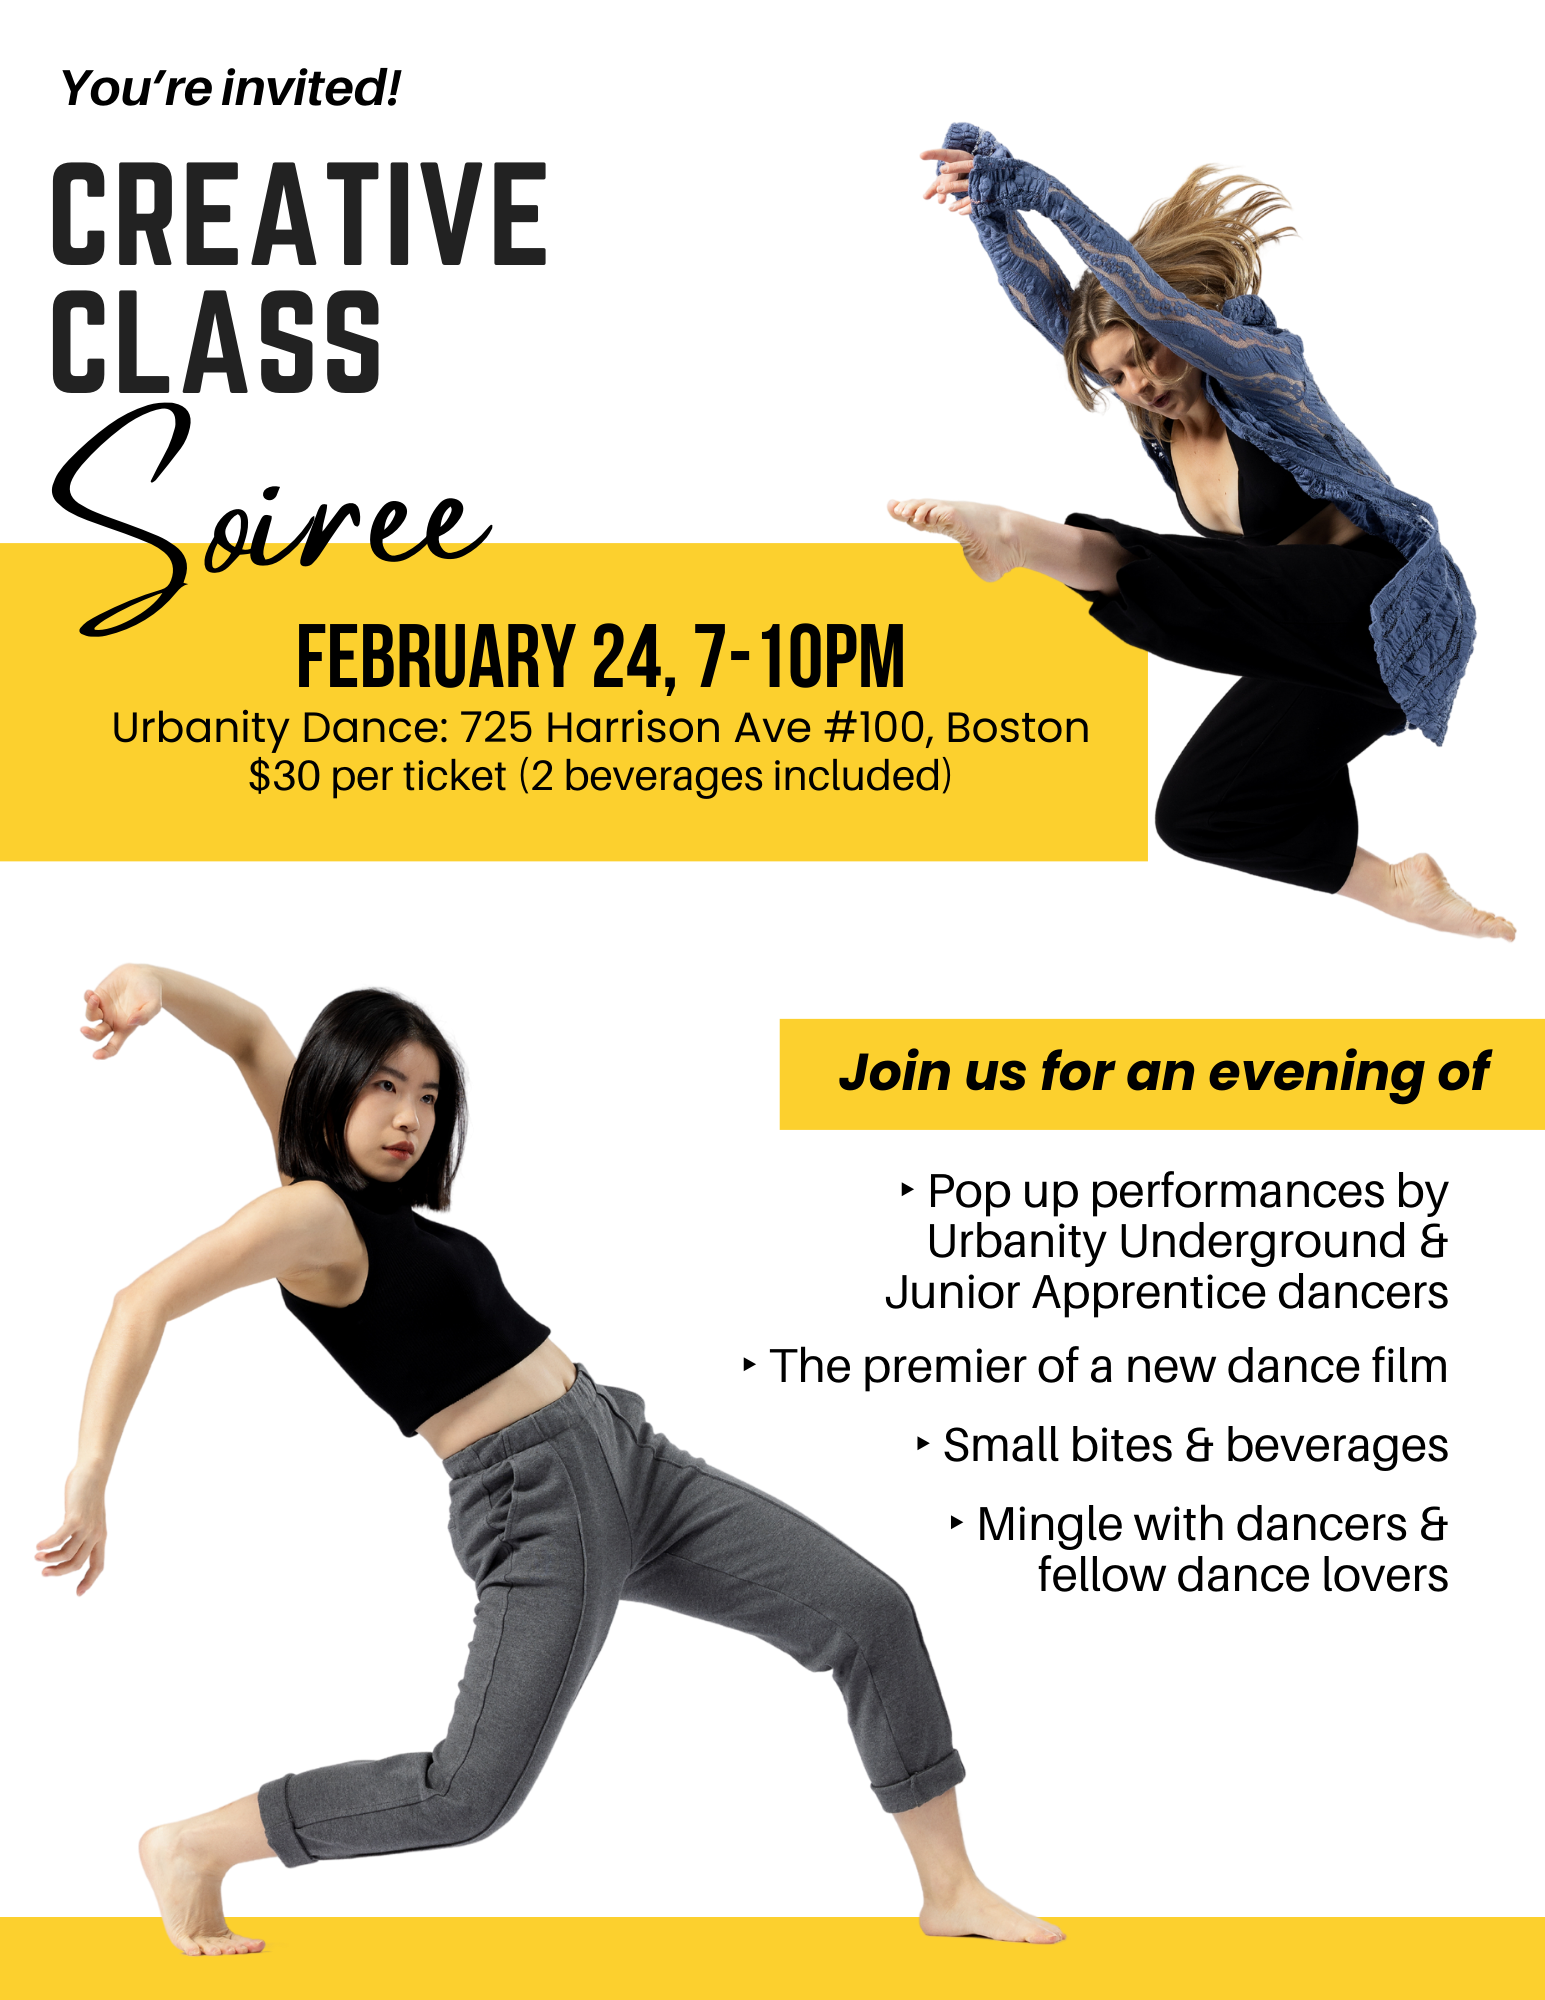 Soiree poster with event information and two photos of dancers: one jumping with one leg bent and one leg straight; the other in a lunge reaching arms past their back.